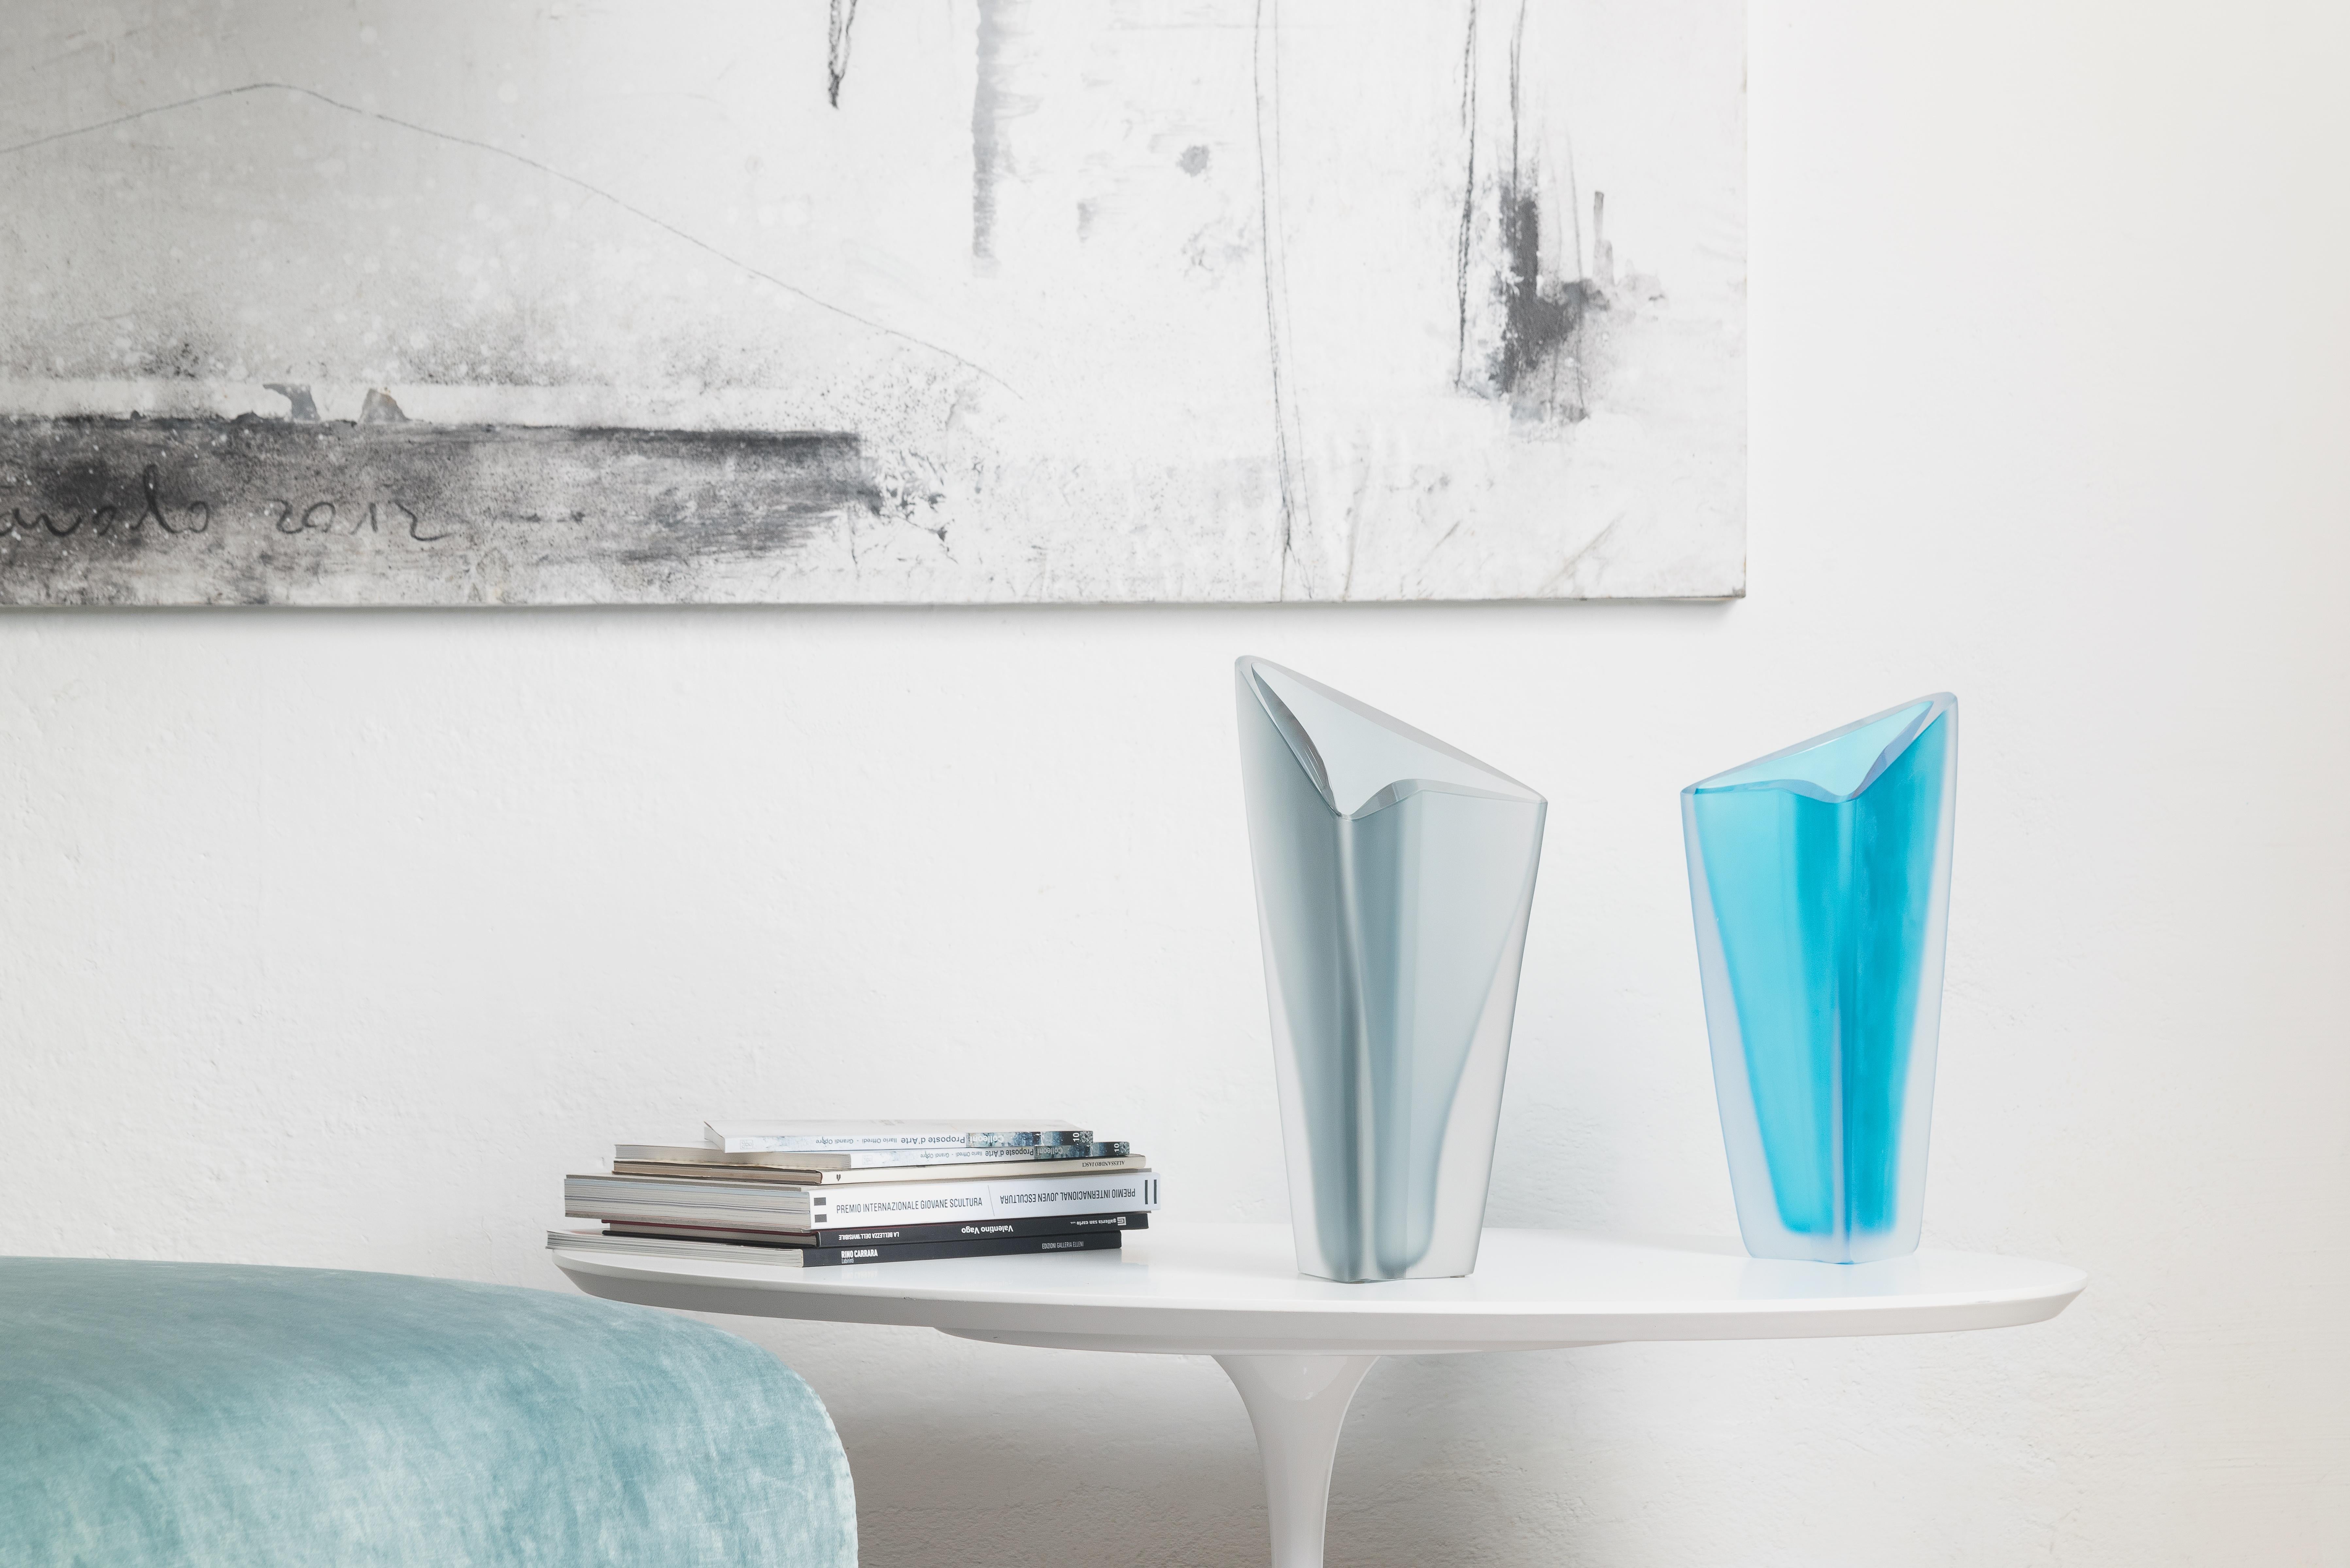 21st century Alessandro Mendini Freccia large vase in Murano glass various colors.
Designed by Alessandro Mendini, Freccia is a triangular base vase with an integral side which serves to give both direction and an arrow shape. The top is diagonal